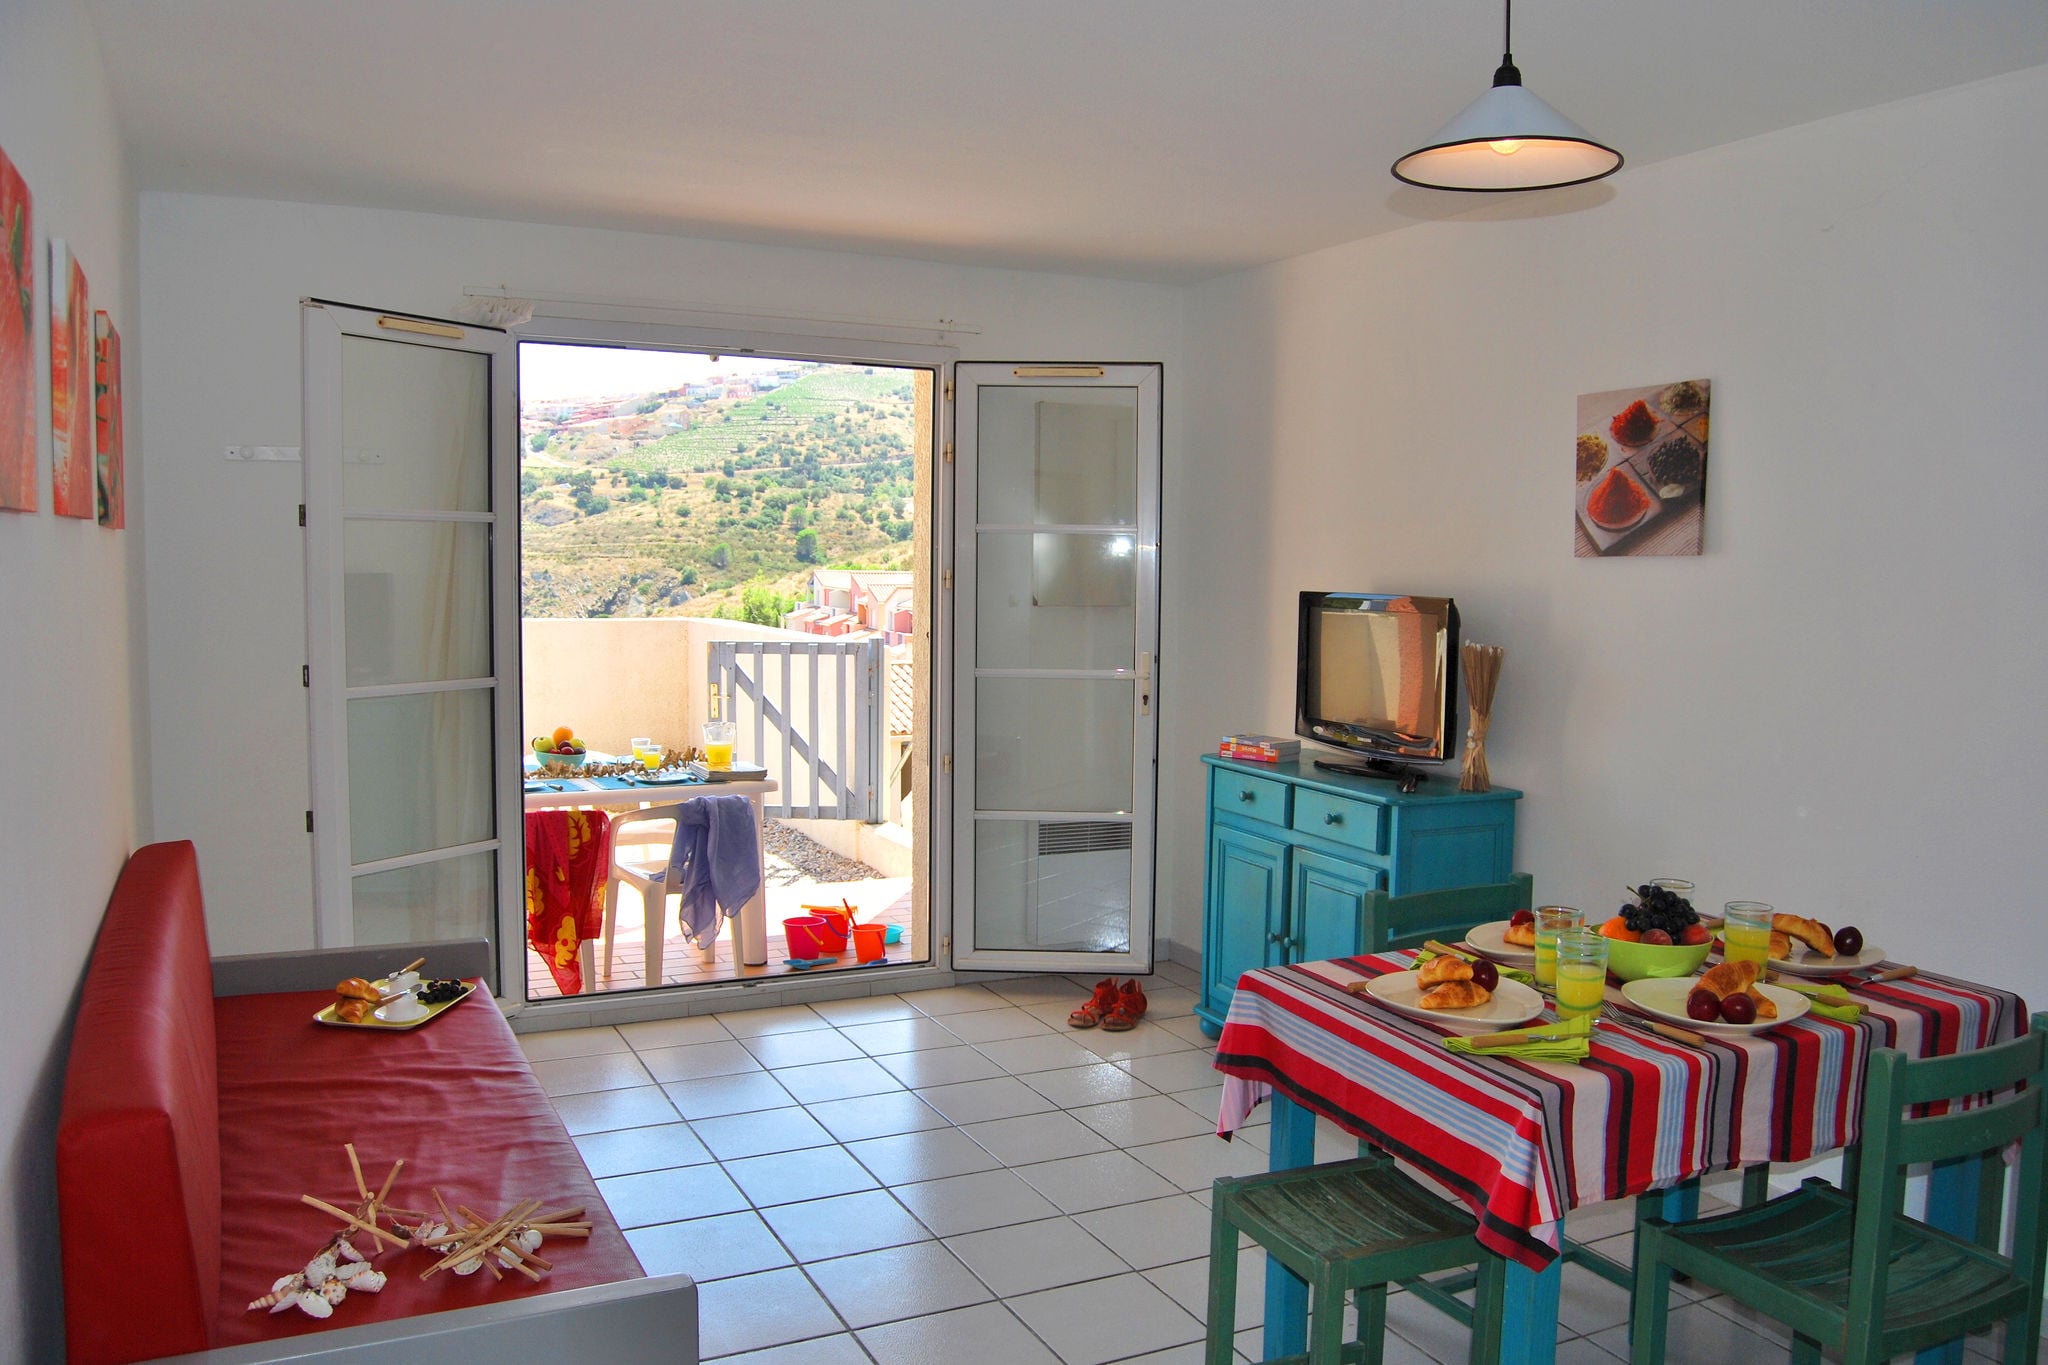 Colorful apartment with balcony or terrace 500m from the sea